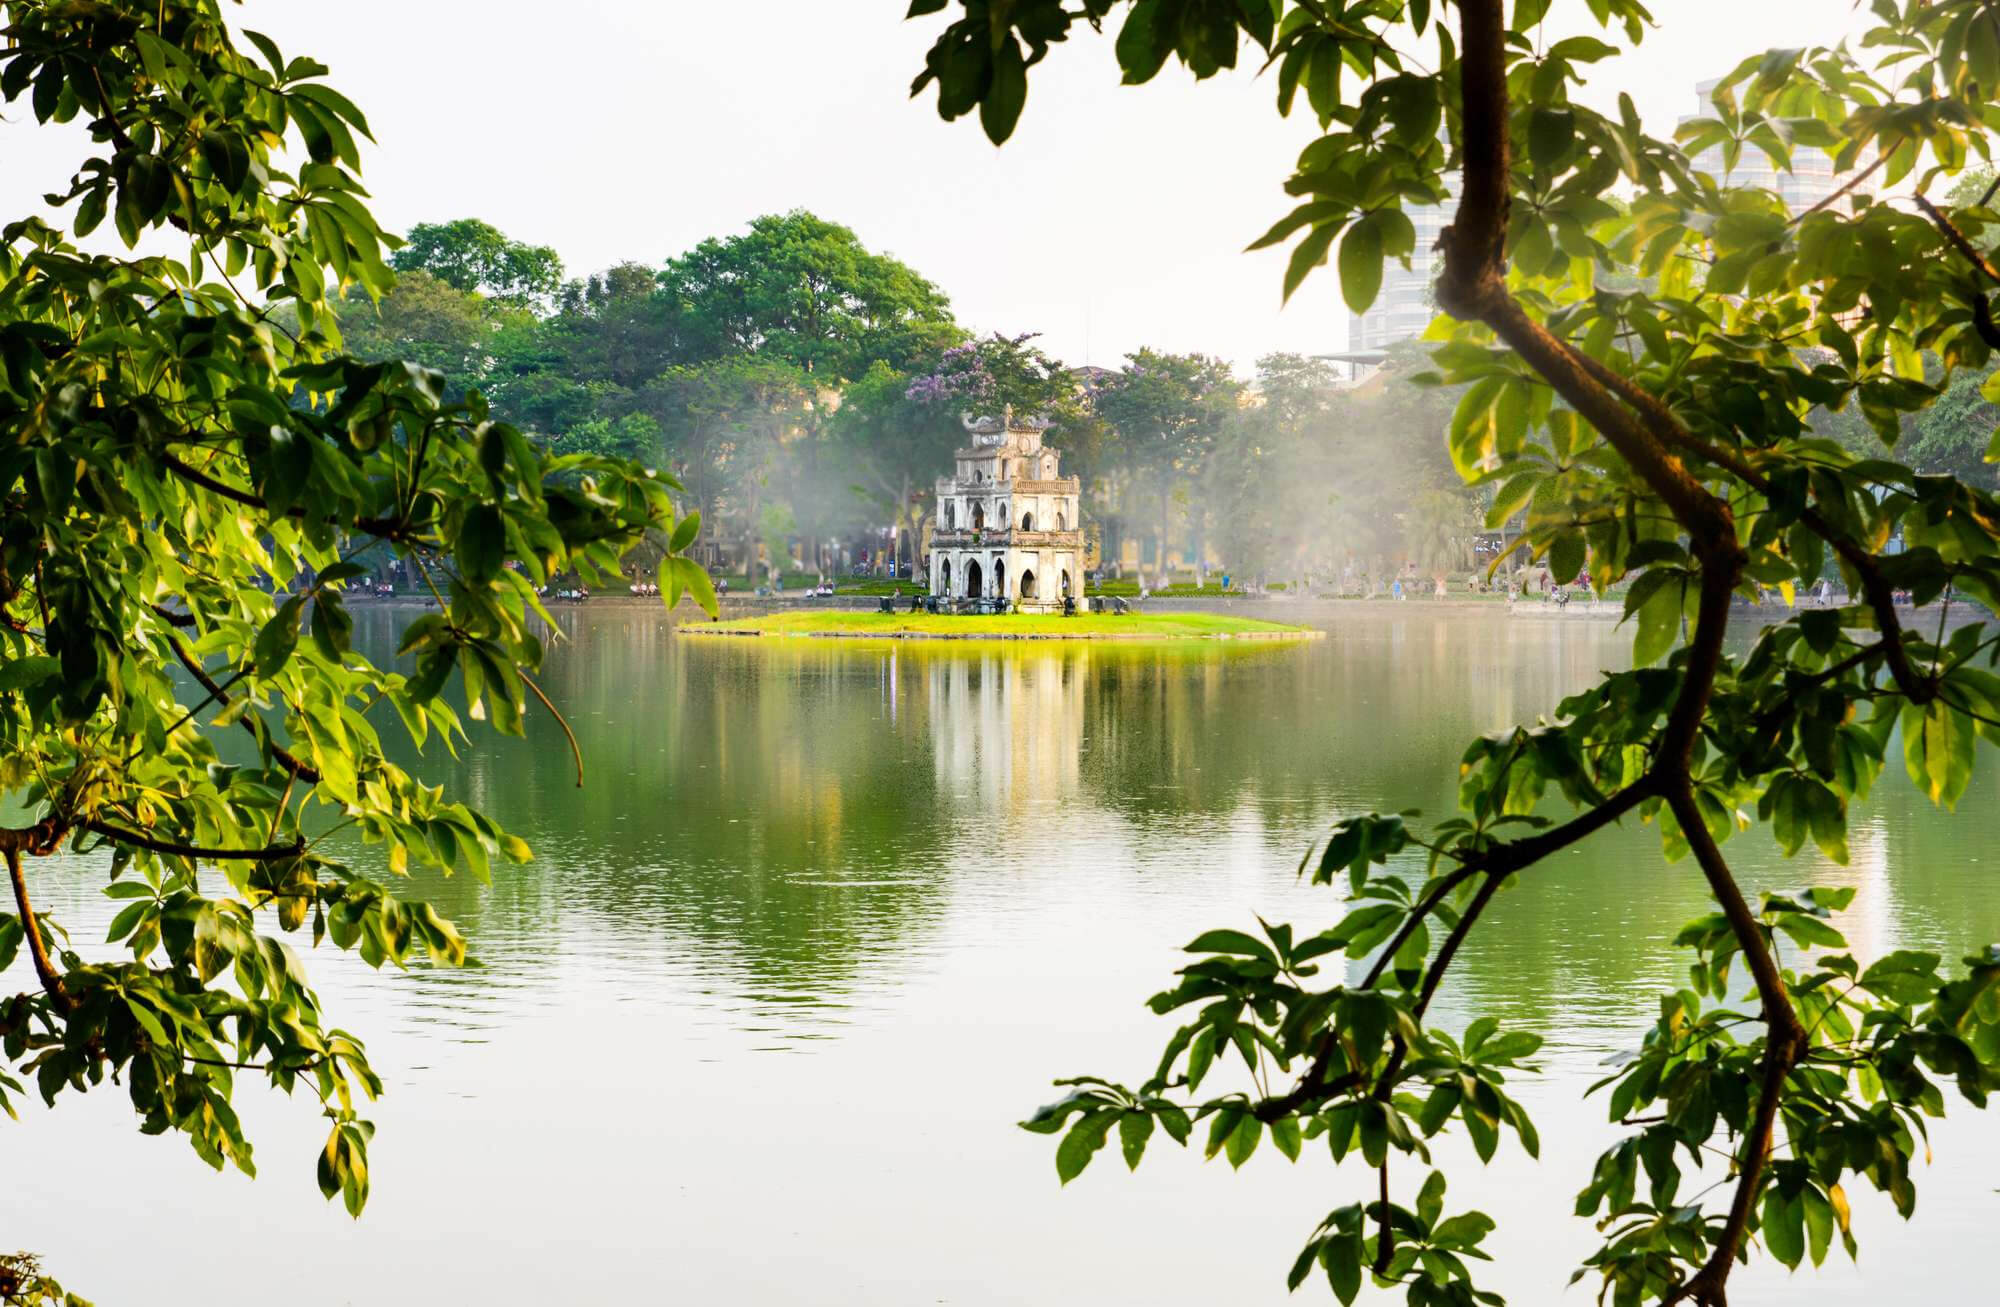 Hoan Kiem Lake is conveniently located in the very centre of Hanoi